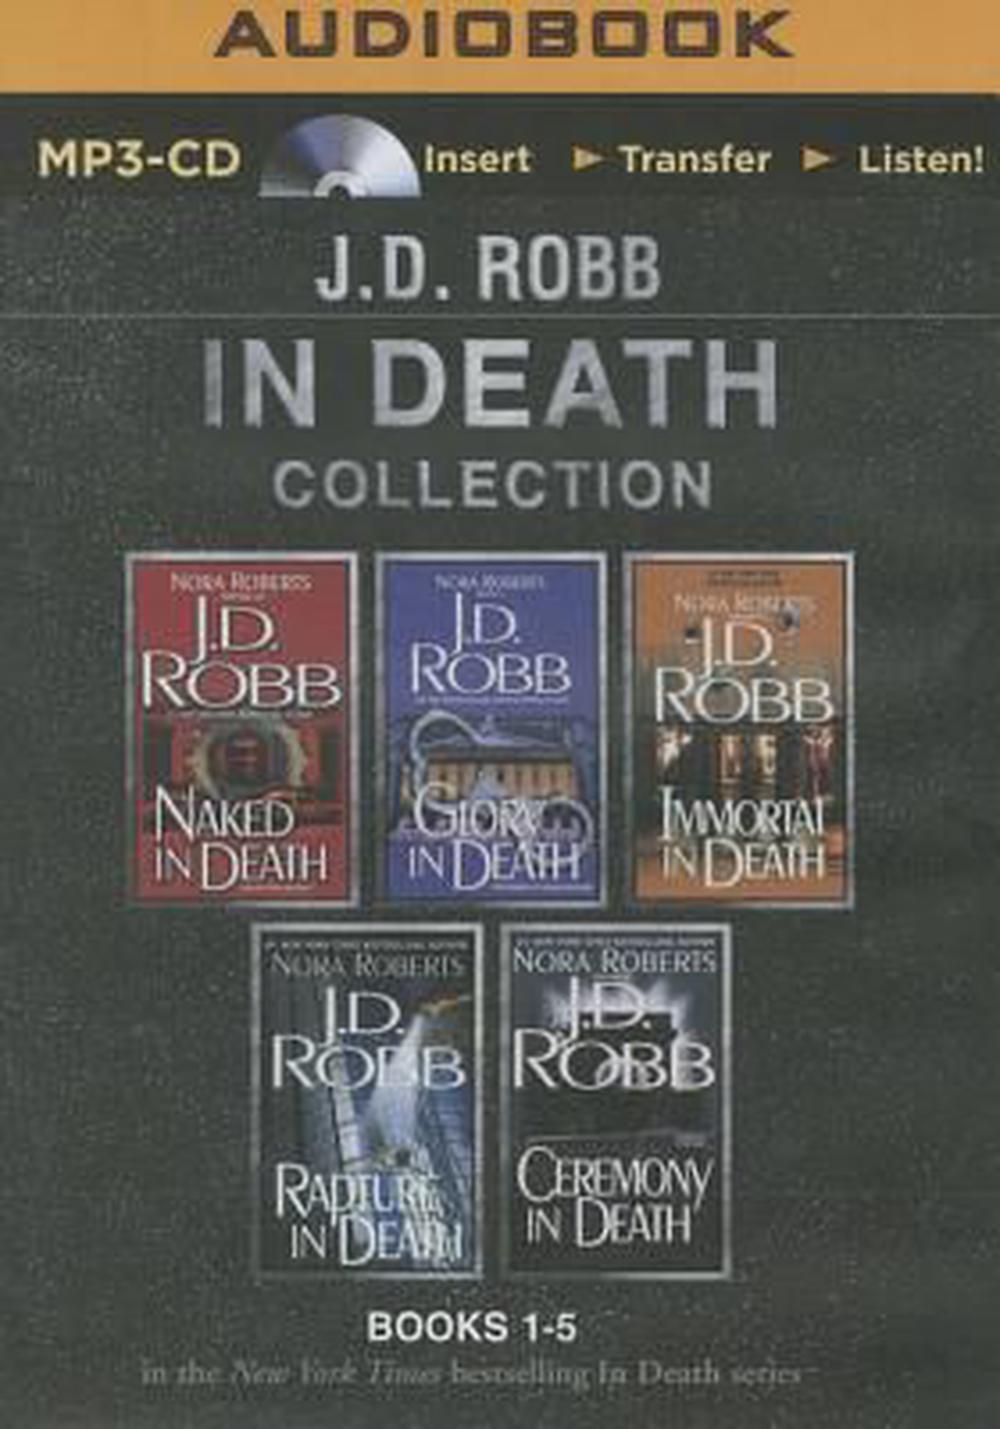 J. D. Robb Collection 1: Naked in Death, Glory in Death 